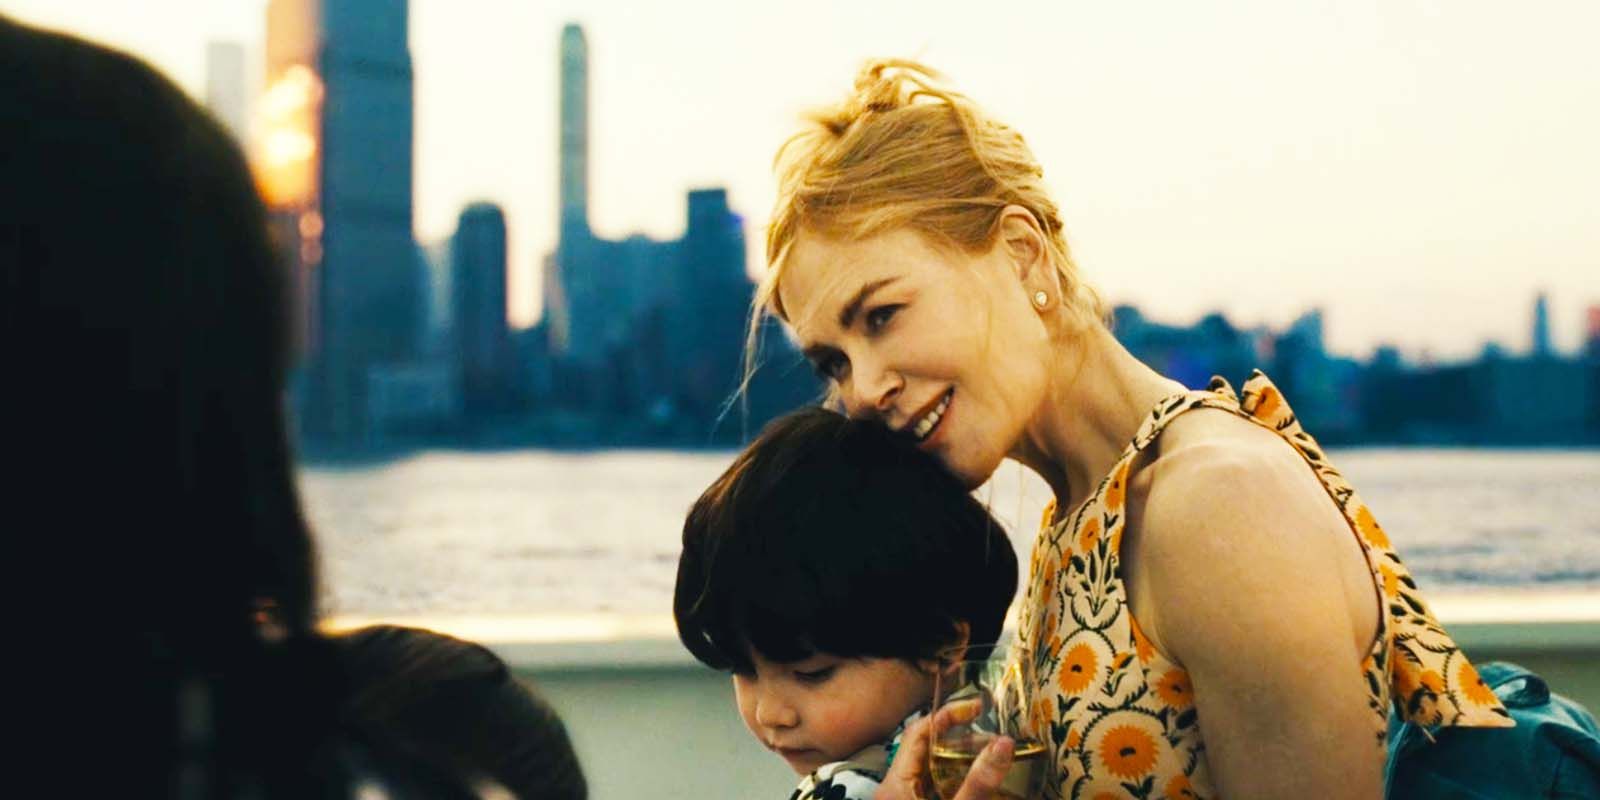 Yoo Ji Young as Marcy, Connor James as Gus, and Nicole Kidman as Margaret in Expats Episode 2